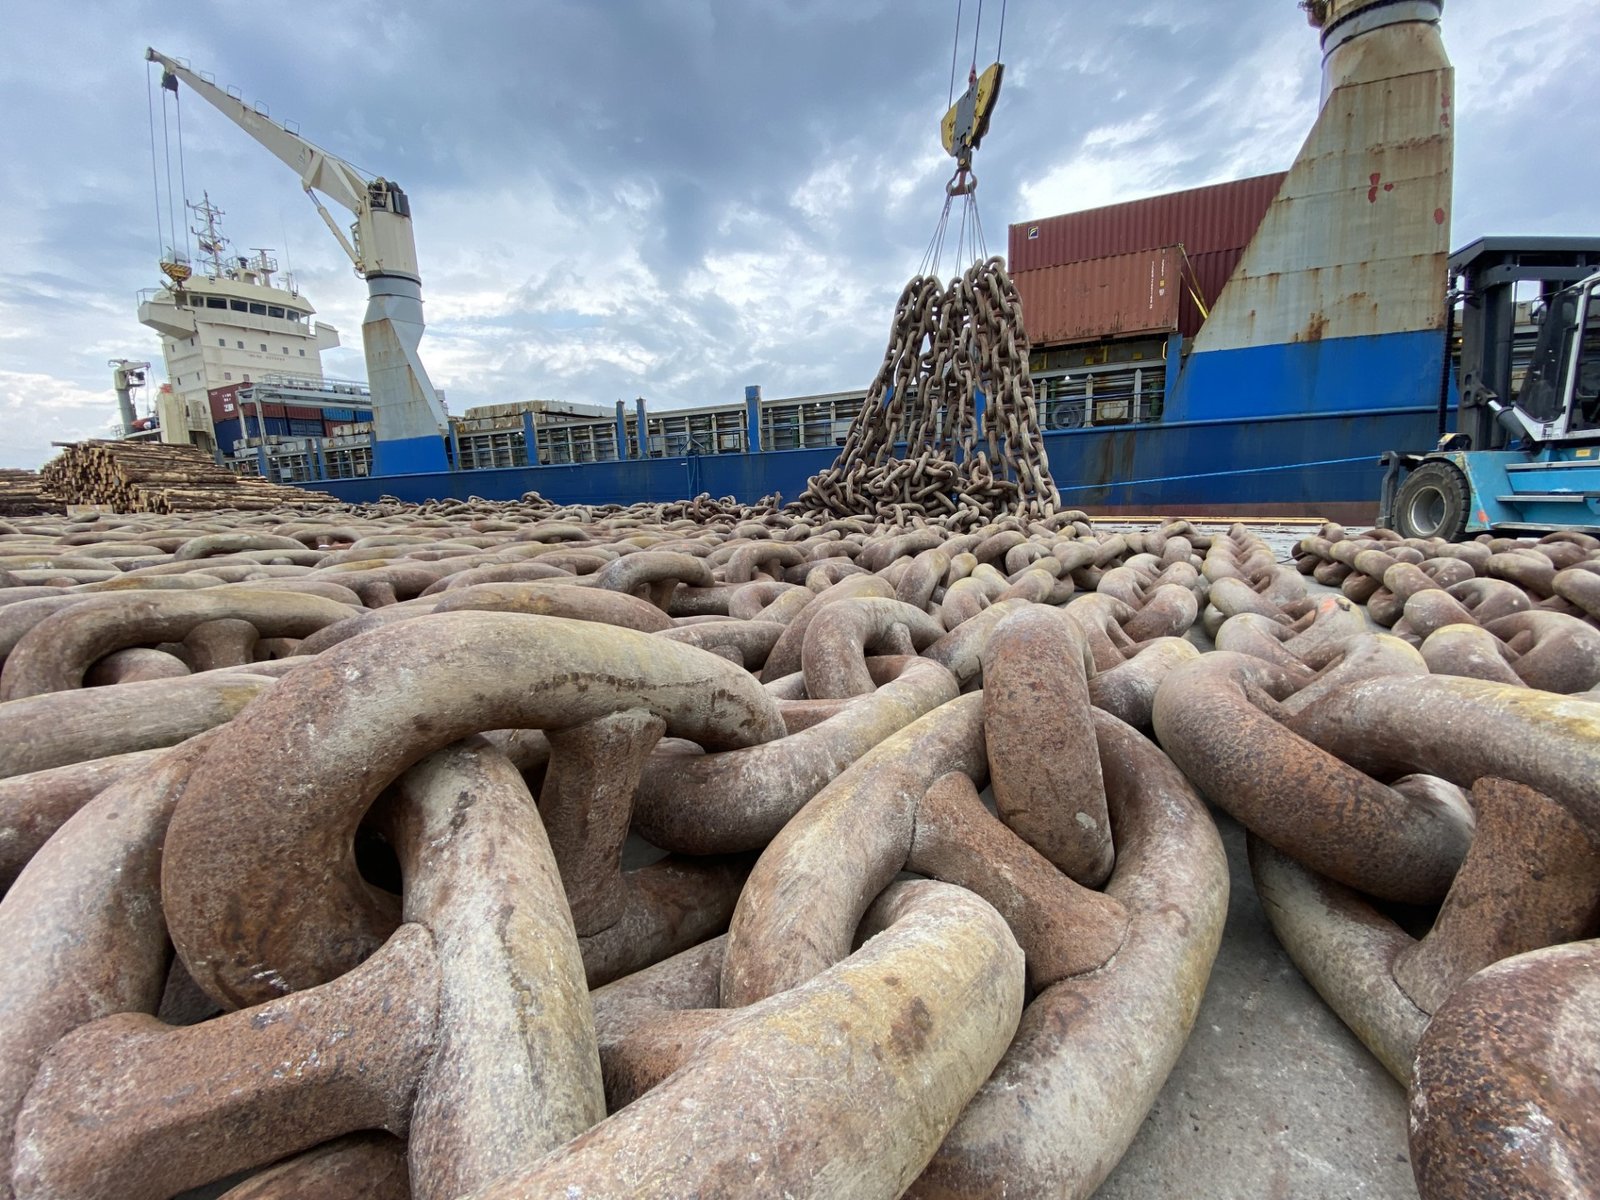 Big chains delivery for an offshore rig